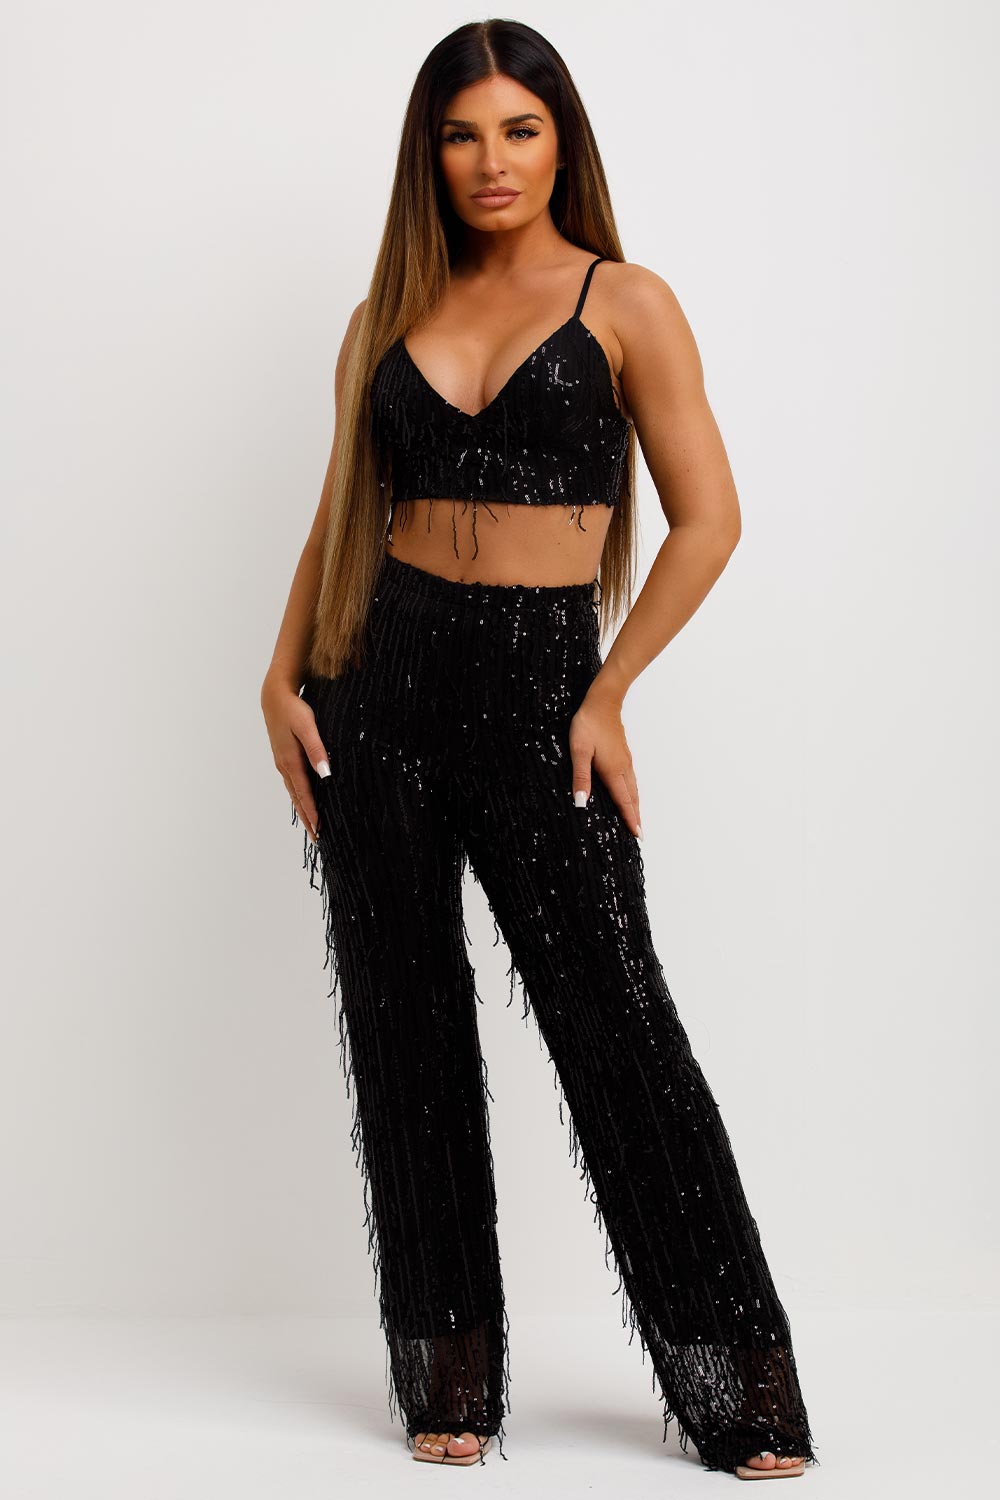 sequin sparkly trousers and top going out christmas party outfit